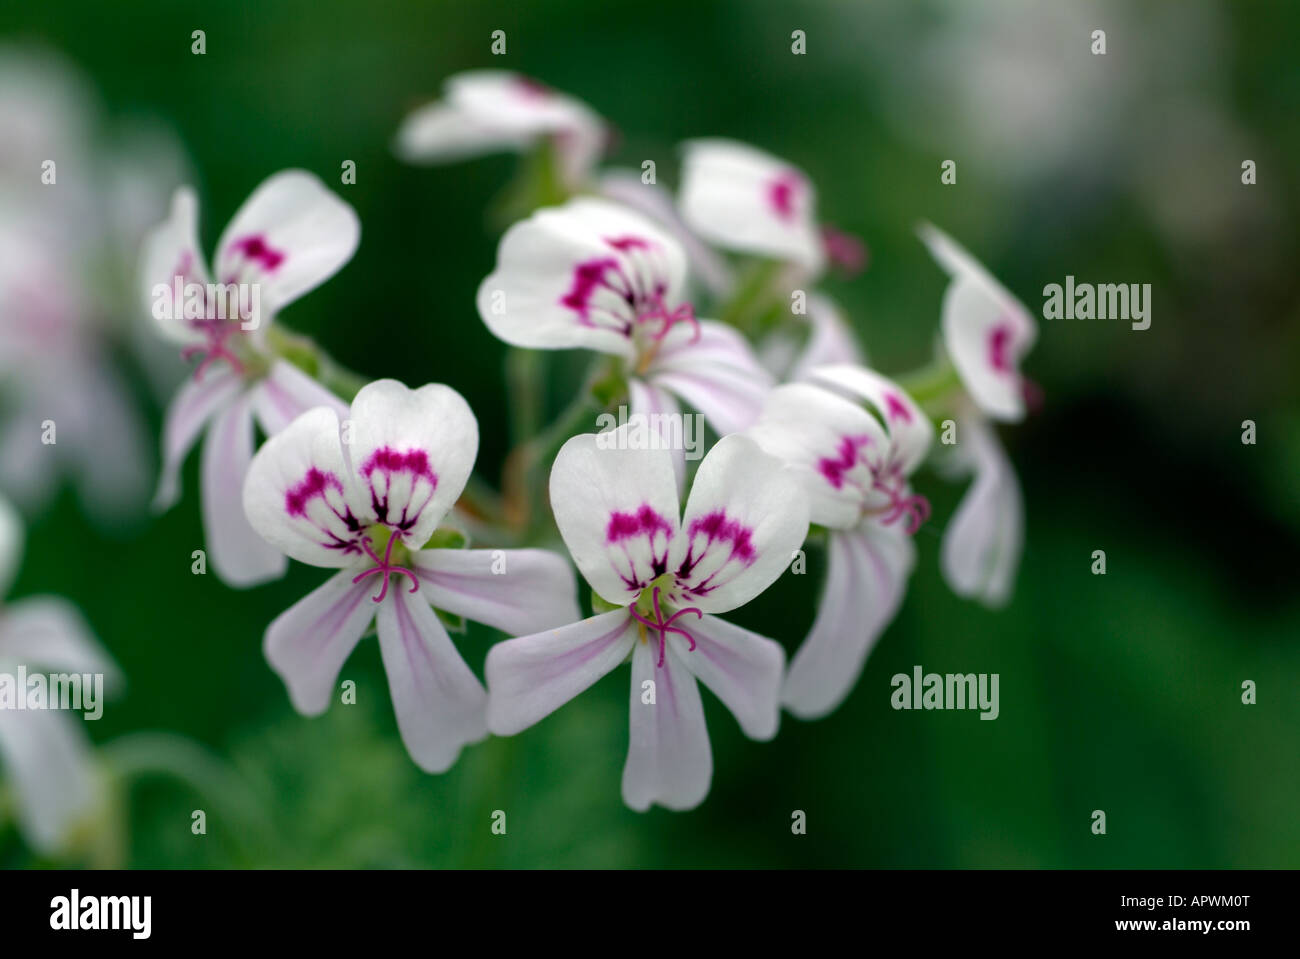 White and pink spotted pelargonium flowers arranged in a ring shape with a diffuse green background Stock Photo